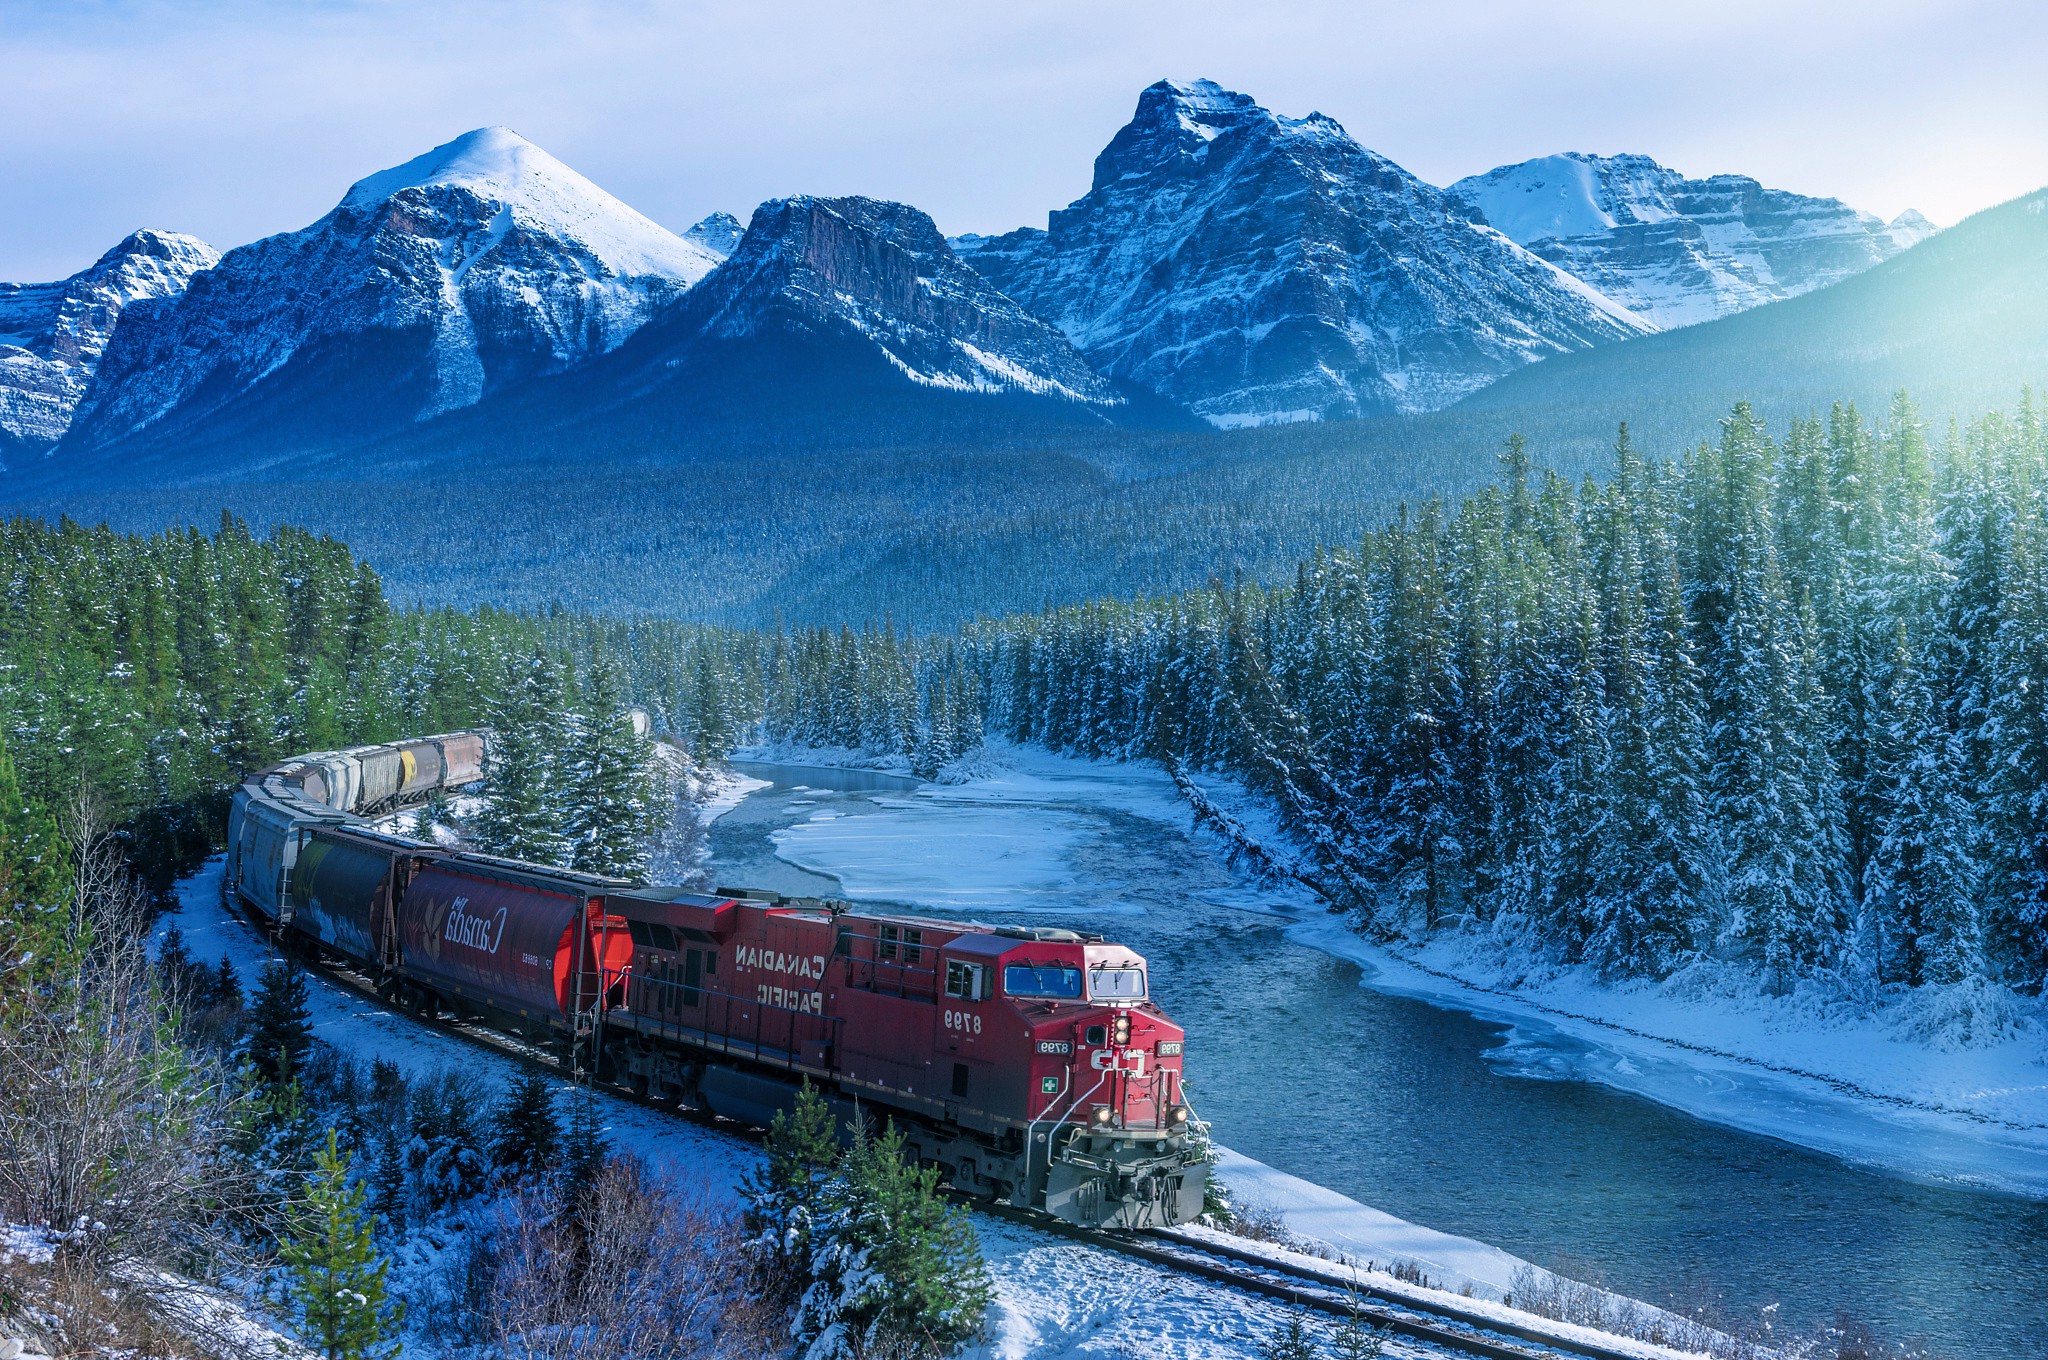 train, Canada, Landscape, Mountain, Trees, Snow, Snowy Peak, Forest, Railway, River, Ice, Rocky Mountains Wallpaper